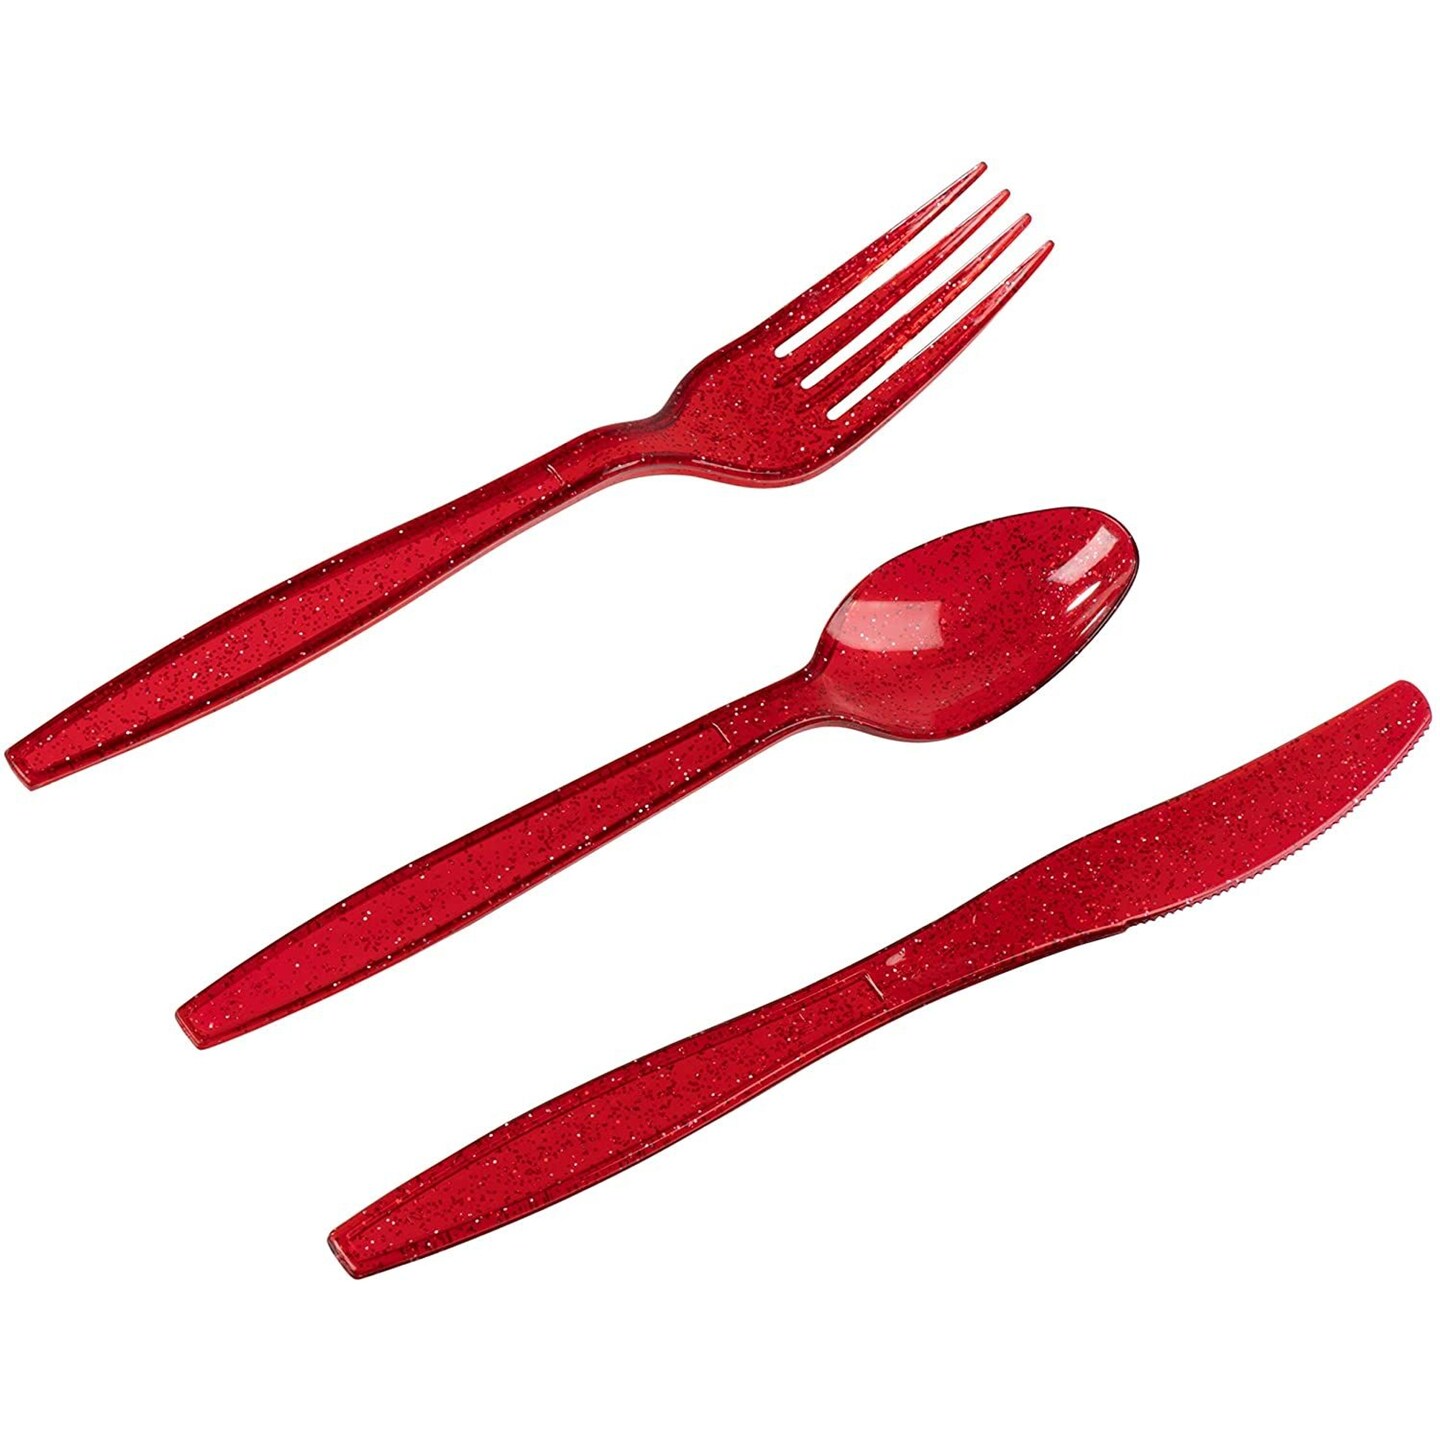 96 Pieces Red Plastic Silverware Set with Spoons, Forks, and Knives for Parties, Birthday, Dinnerware Supplies (Serves 32)